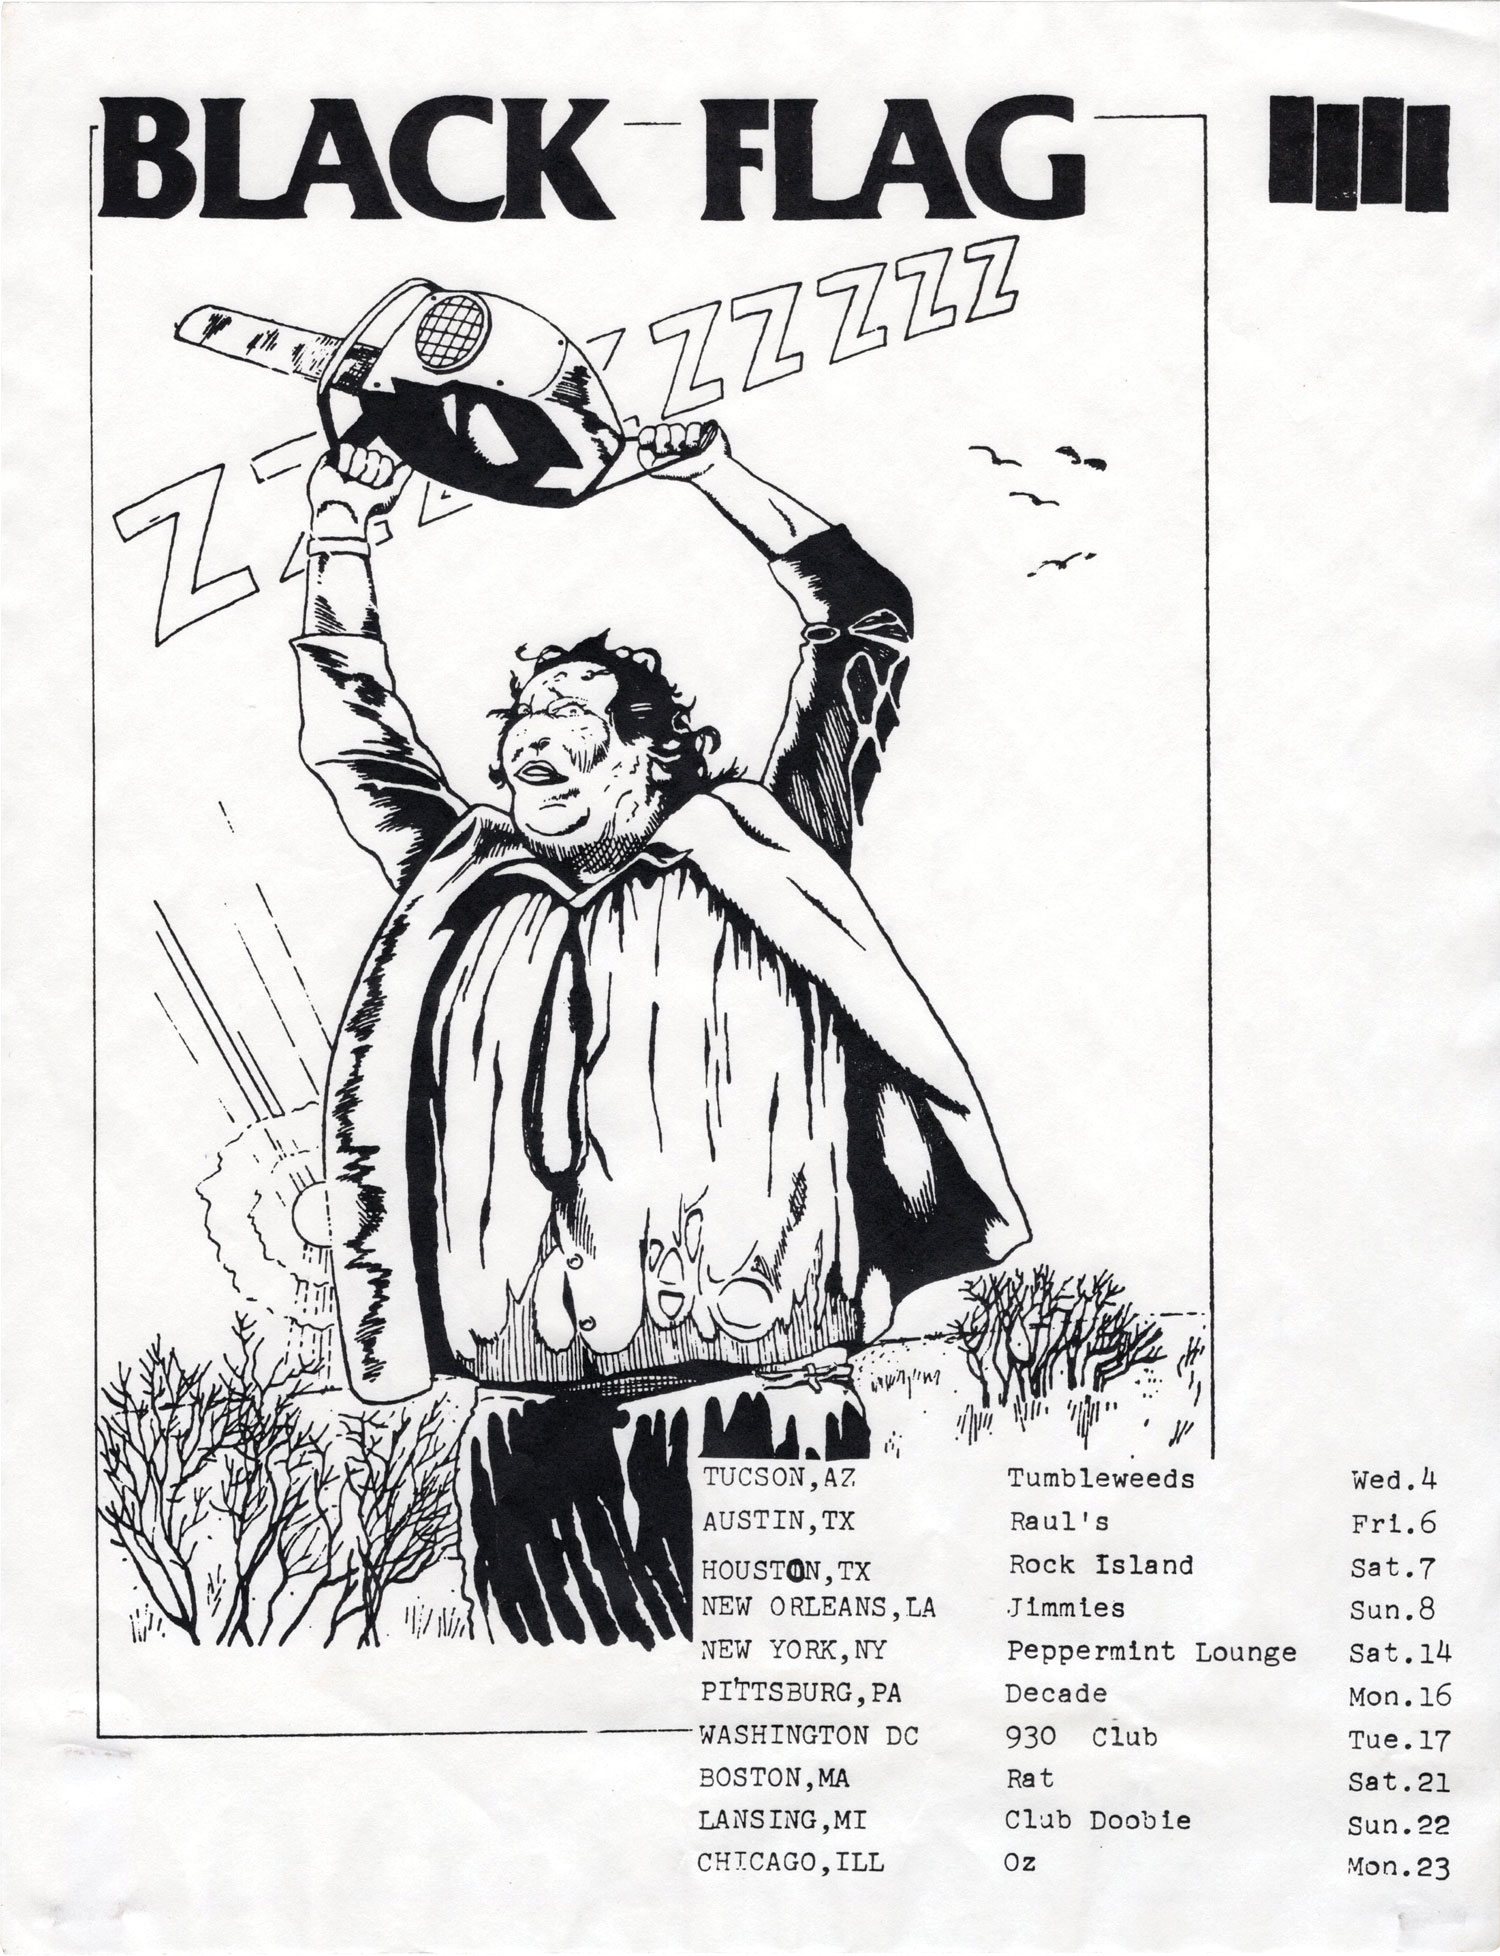 1981 Black Flag tour poster showing figure holding chainsaw aloft like murder weapon